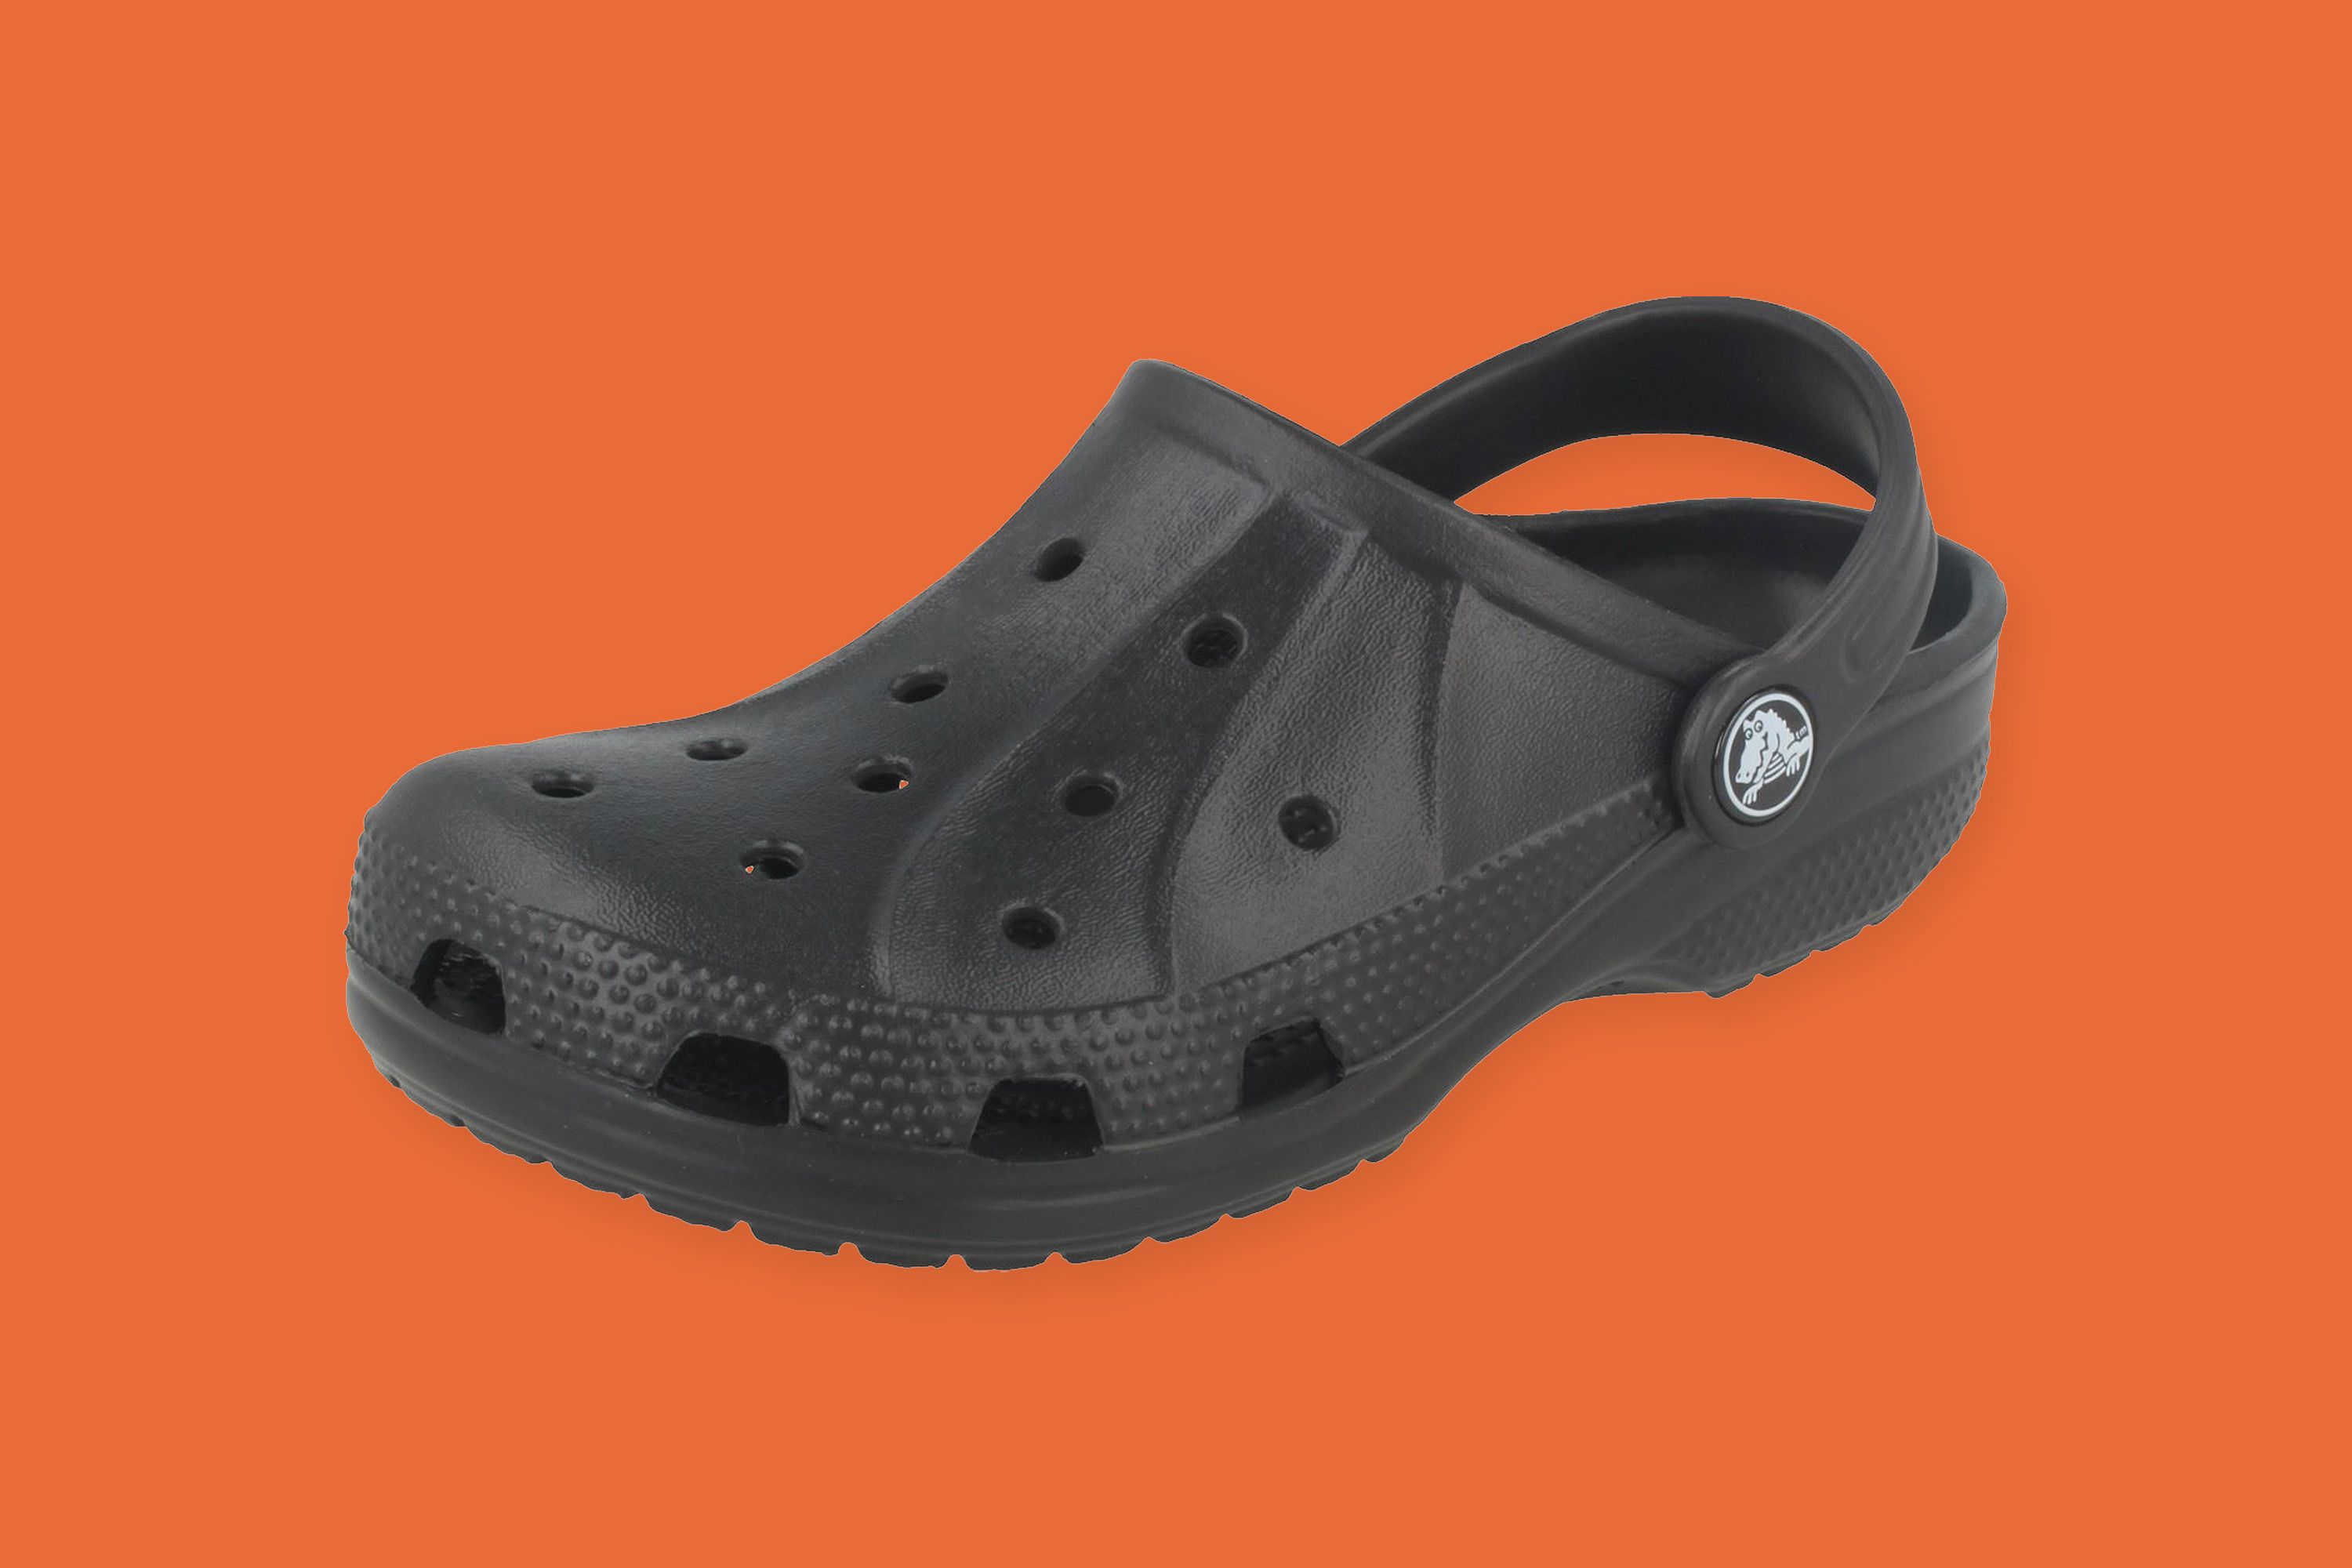 crocs for 6 month old